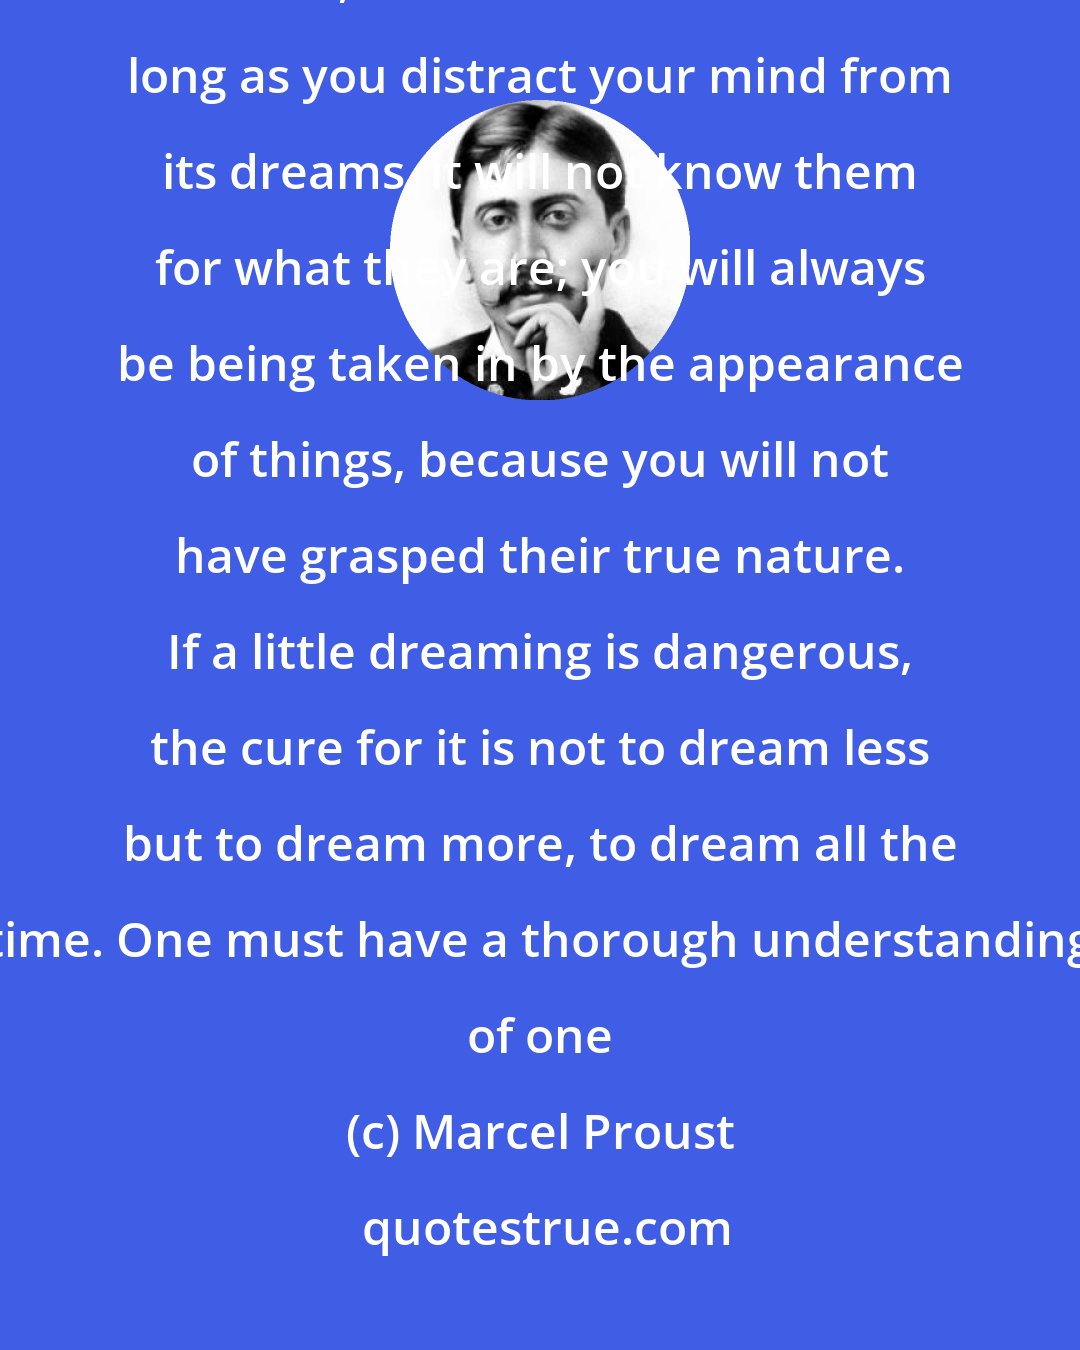 Marcel Proust: When the mind has a tendency to dream, it is a mistake to keep dreams away from it, to ration its dreams. So long as you distract your mind from its dreams, it will not know them for what they are; you will always be being taken in by the appearance of things, because you will not have grasped their true nature. If a little dreaming is dangerous, the cure for it is not to dream less but to dream more, to dream all the time. One must have a thorough understanding of one